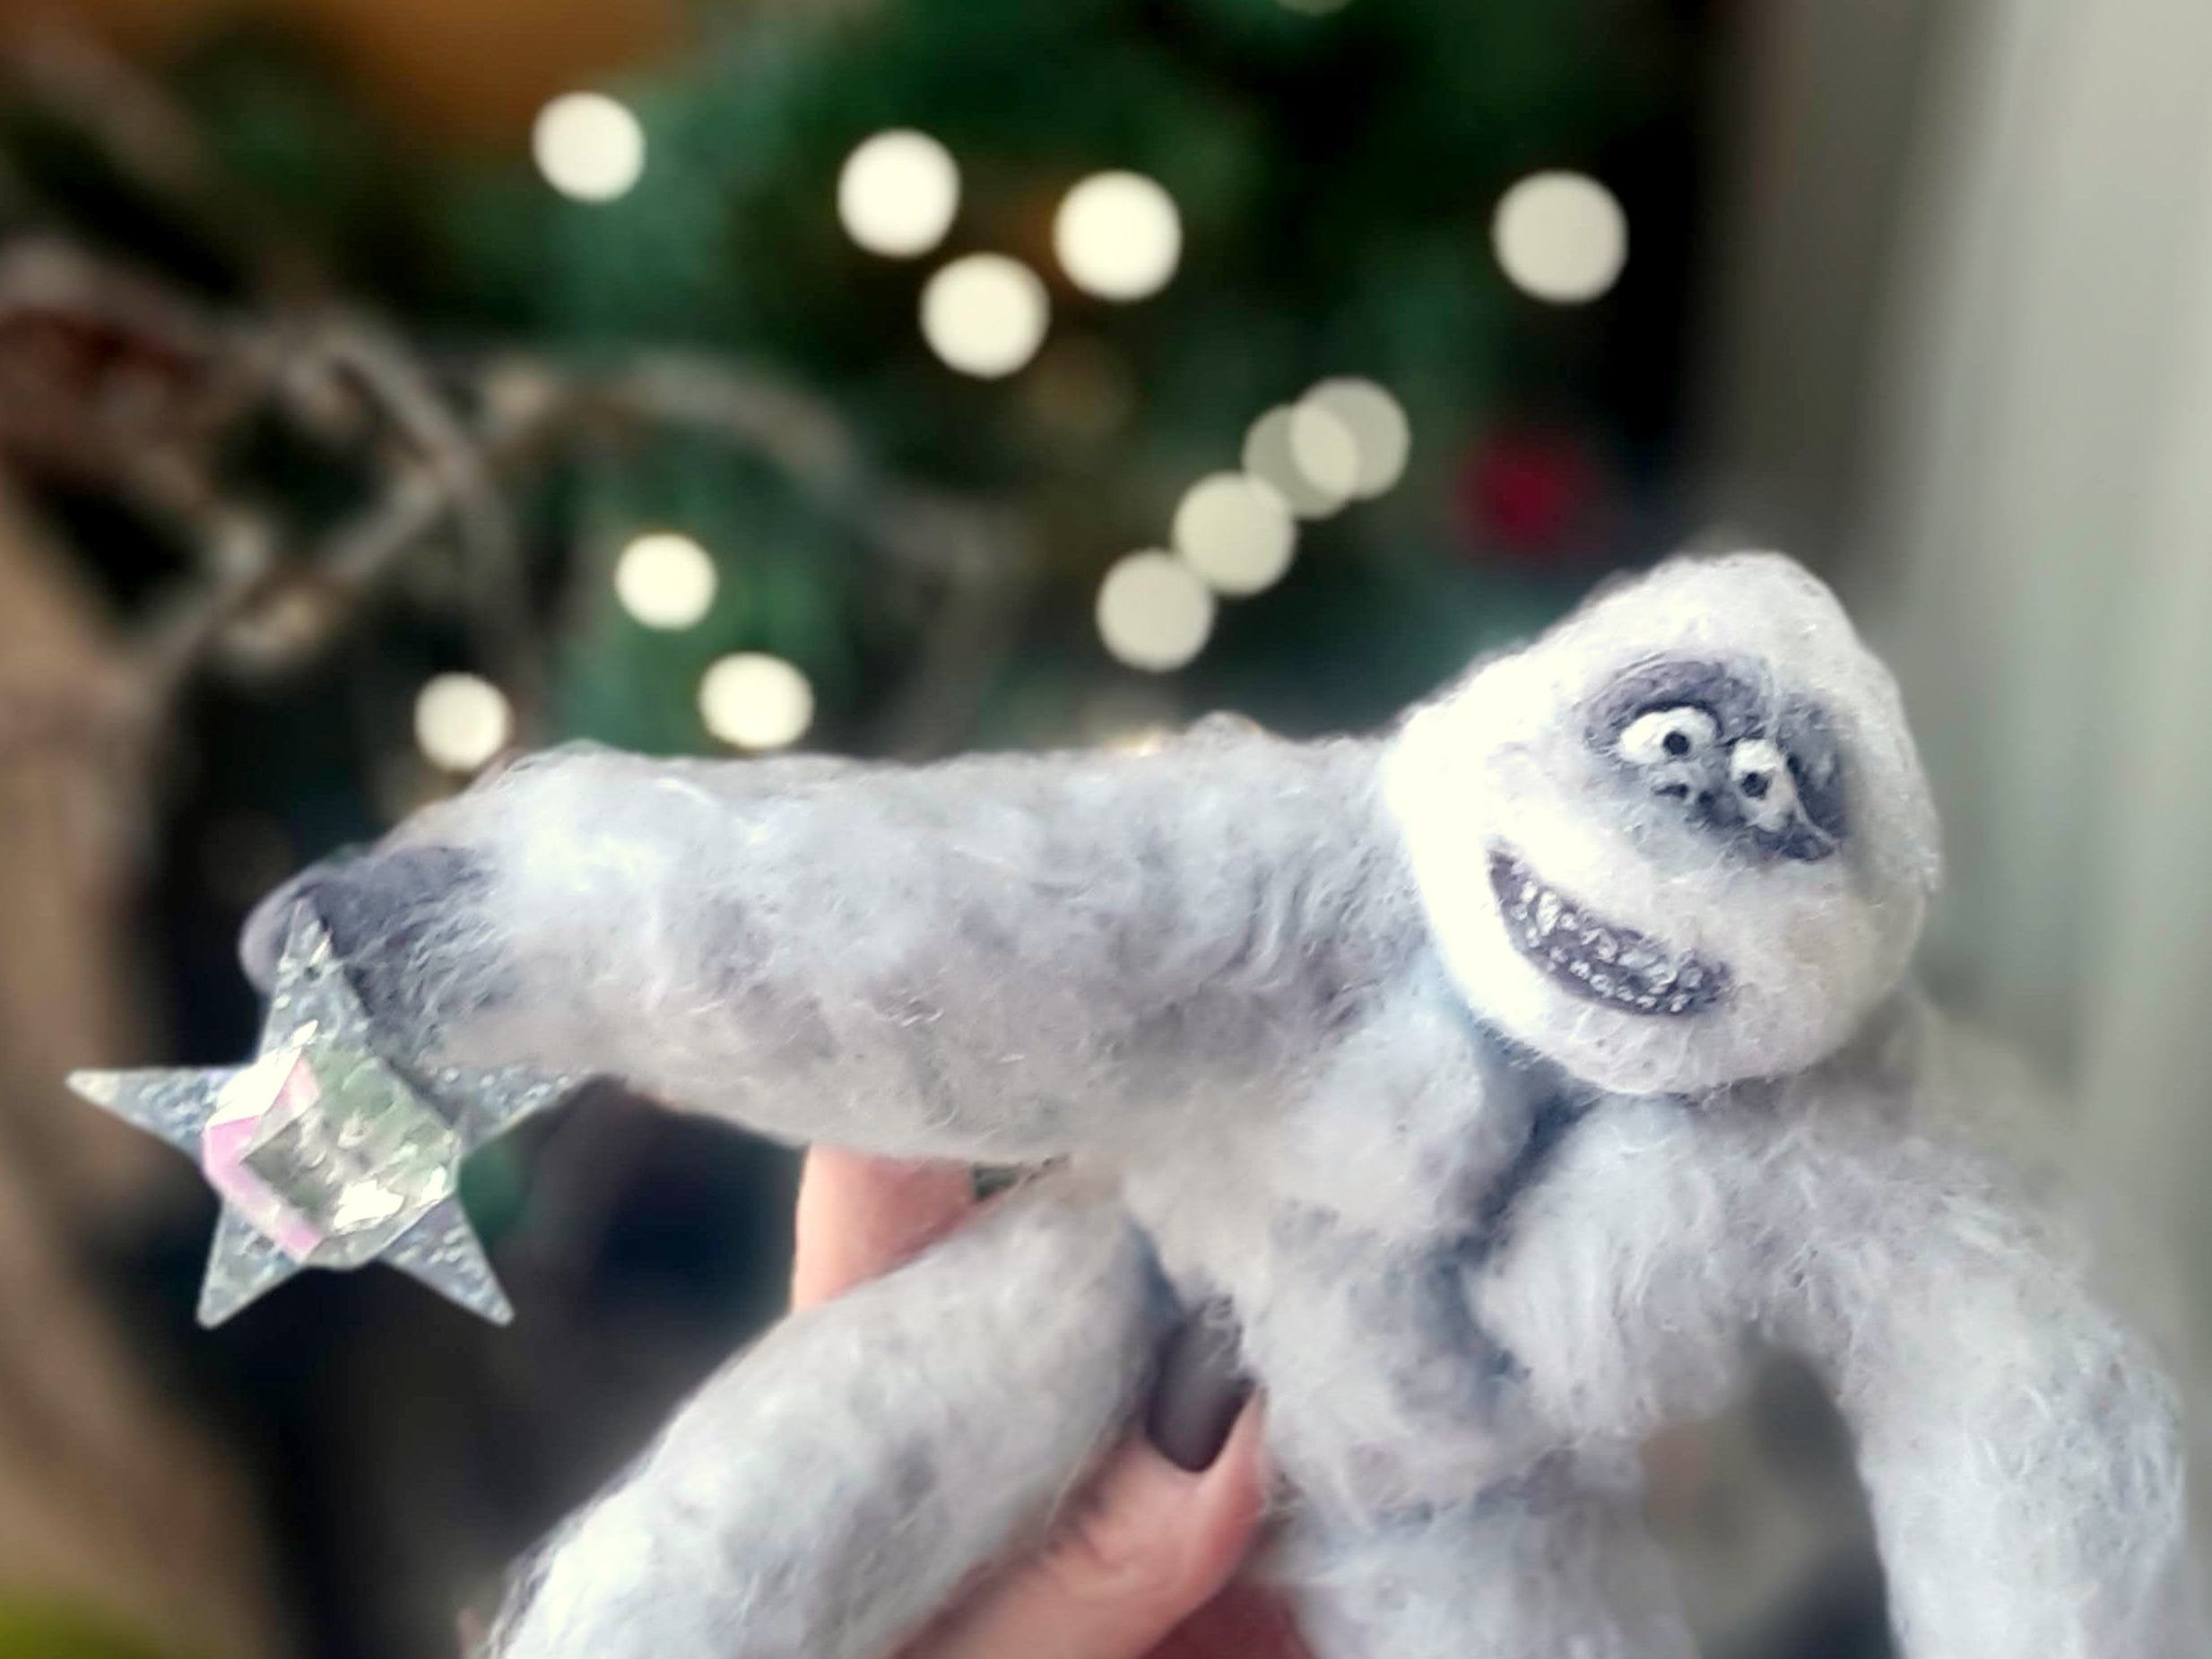  Abominable Snowman Tree Topper Unique Christmas Tree